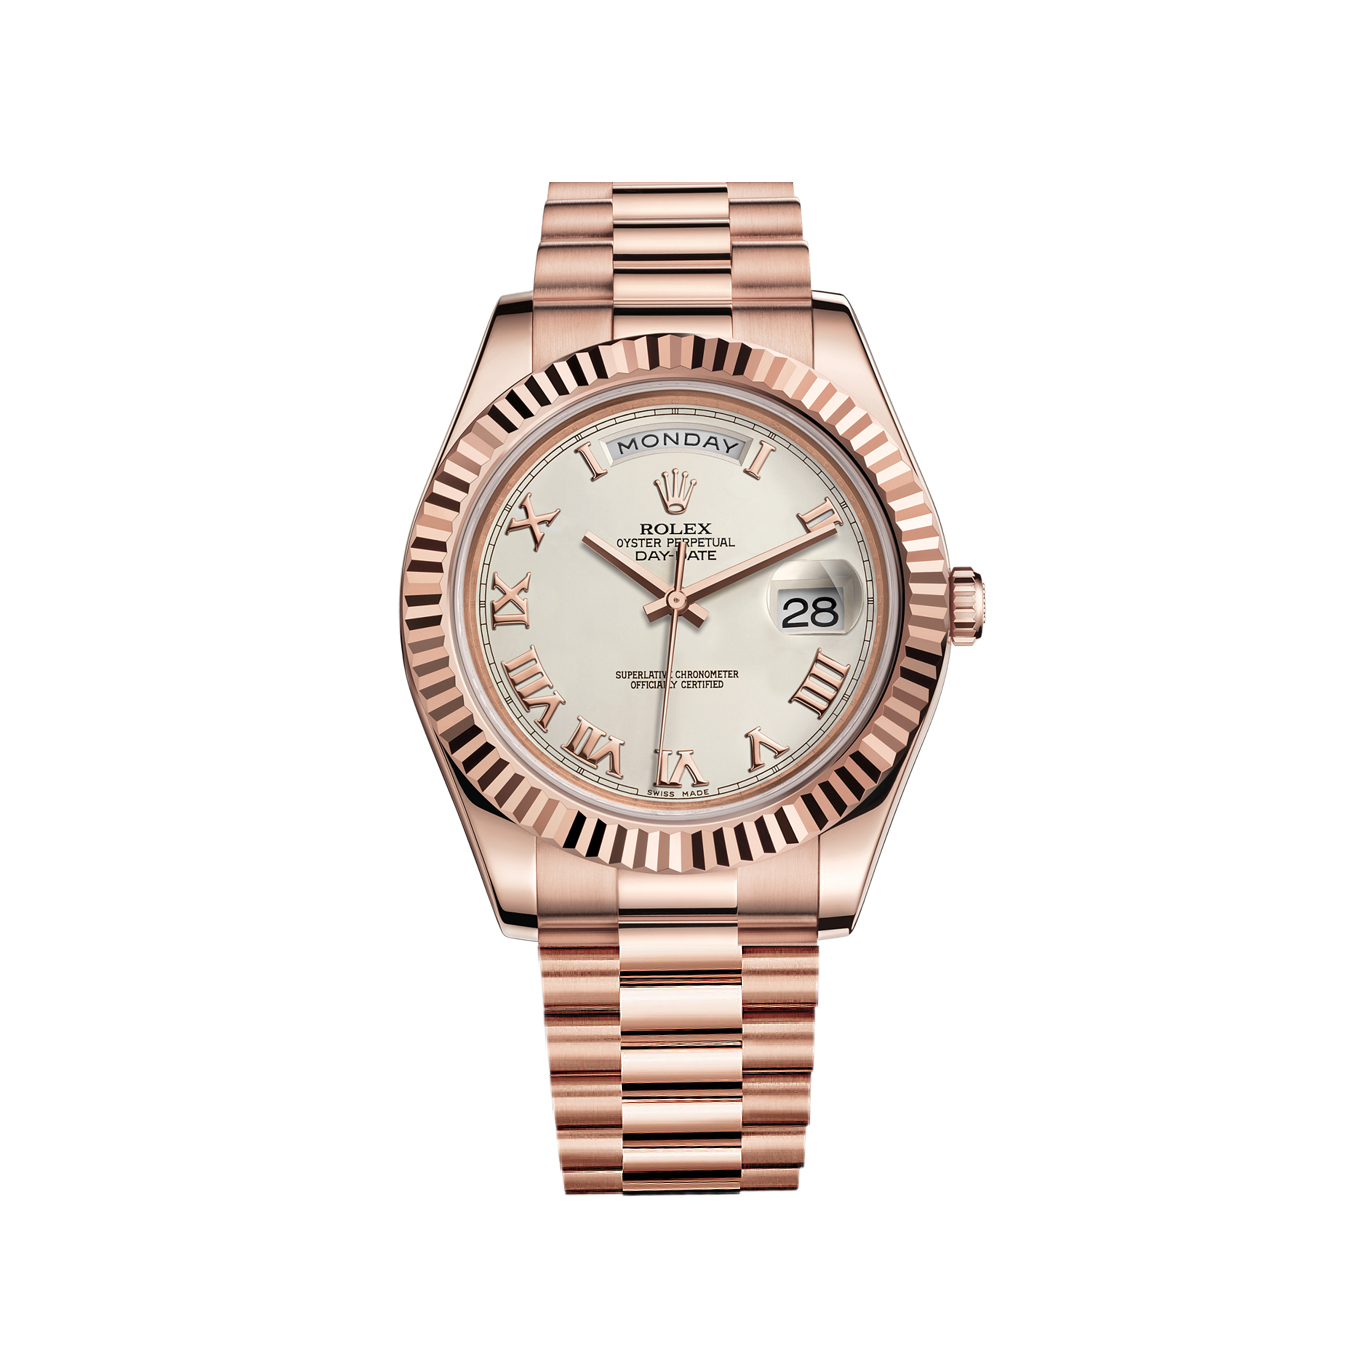 Day-Date II 218235 Rose Gold Watch (Ivory-Coloured)